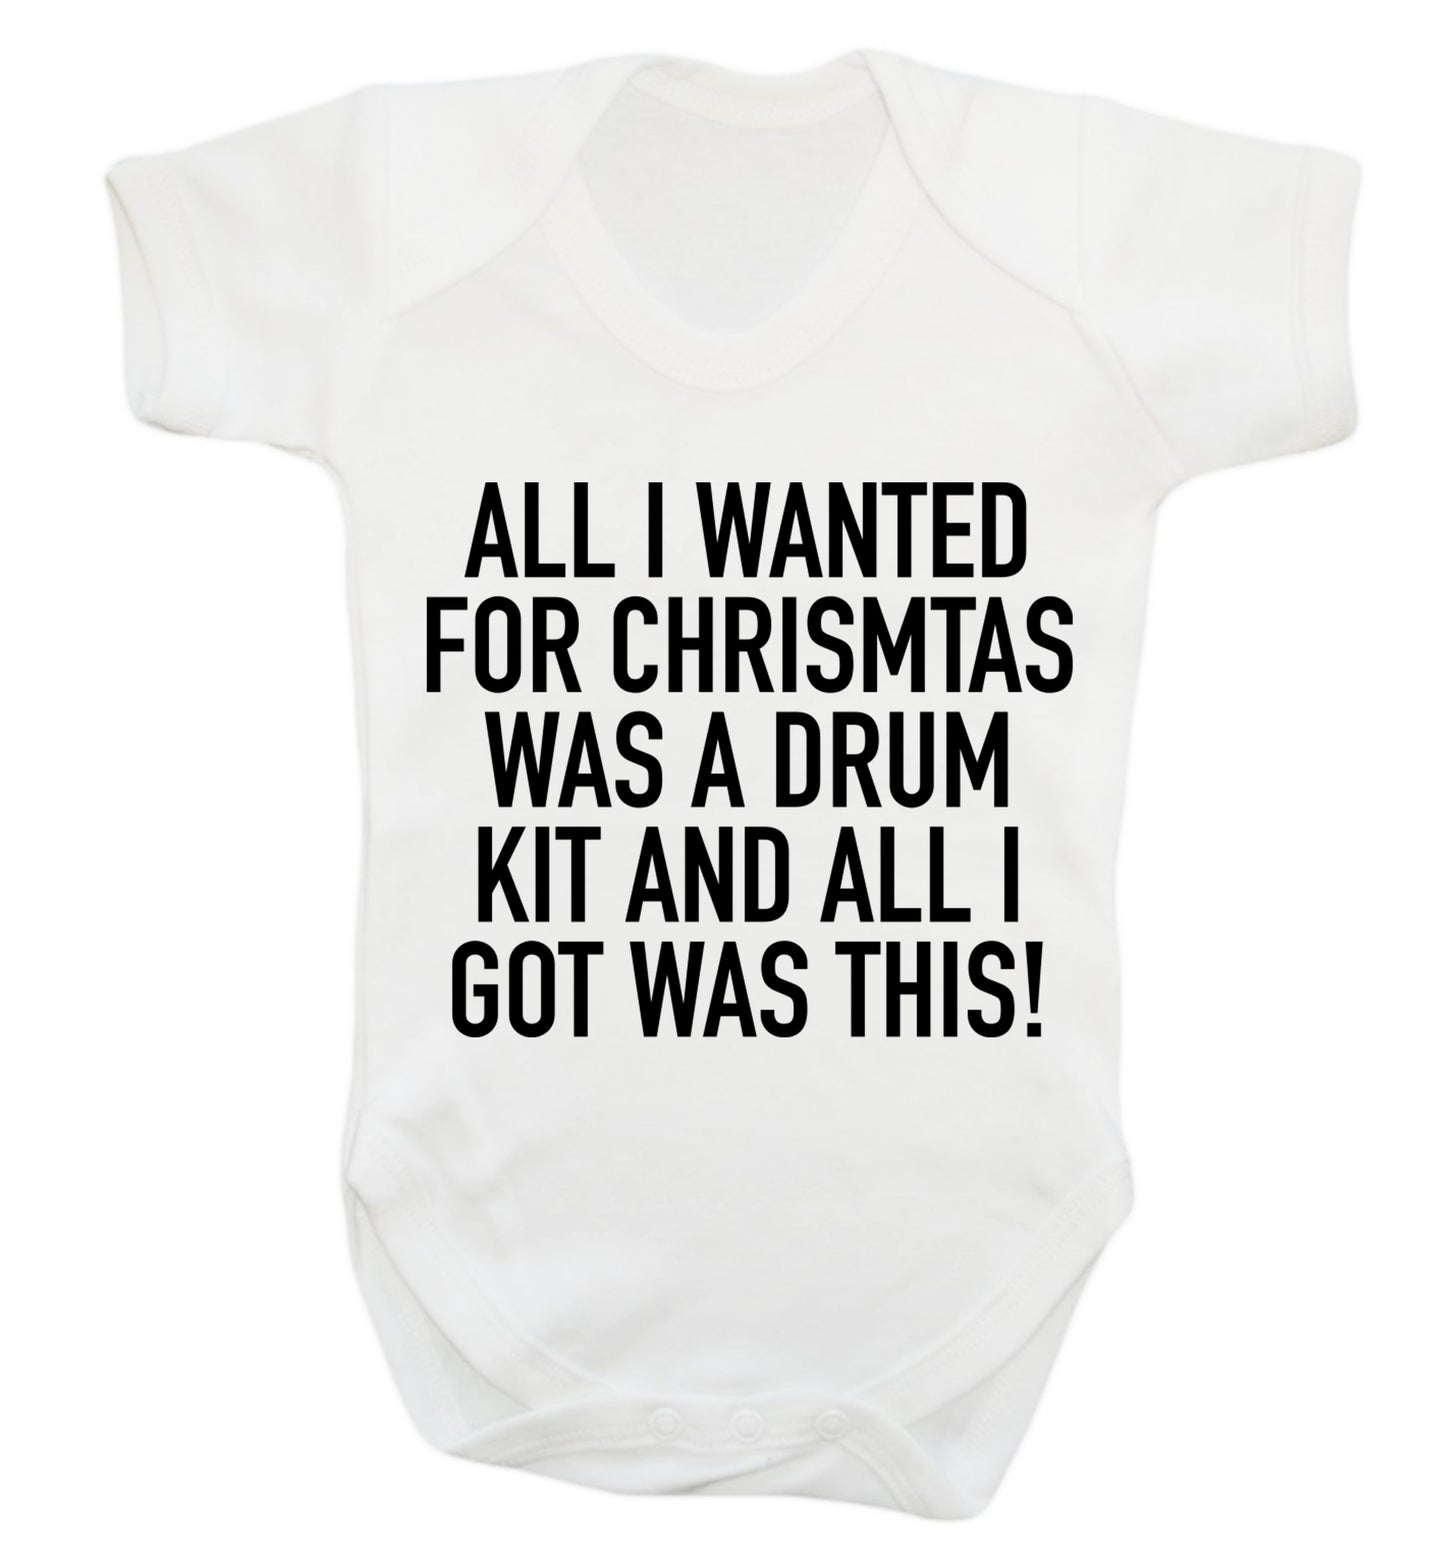 All I wanted for Christmas was a drum kit and all I got was this! Baby Vest white 18-24 months